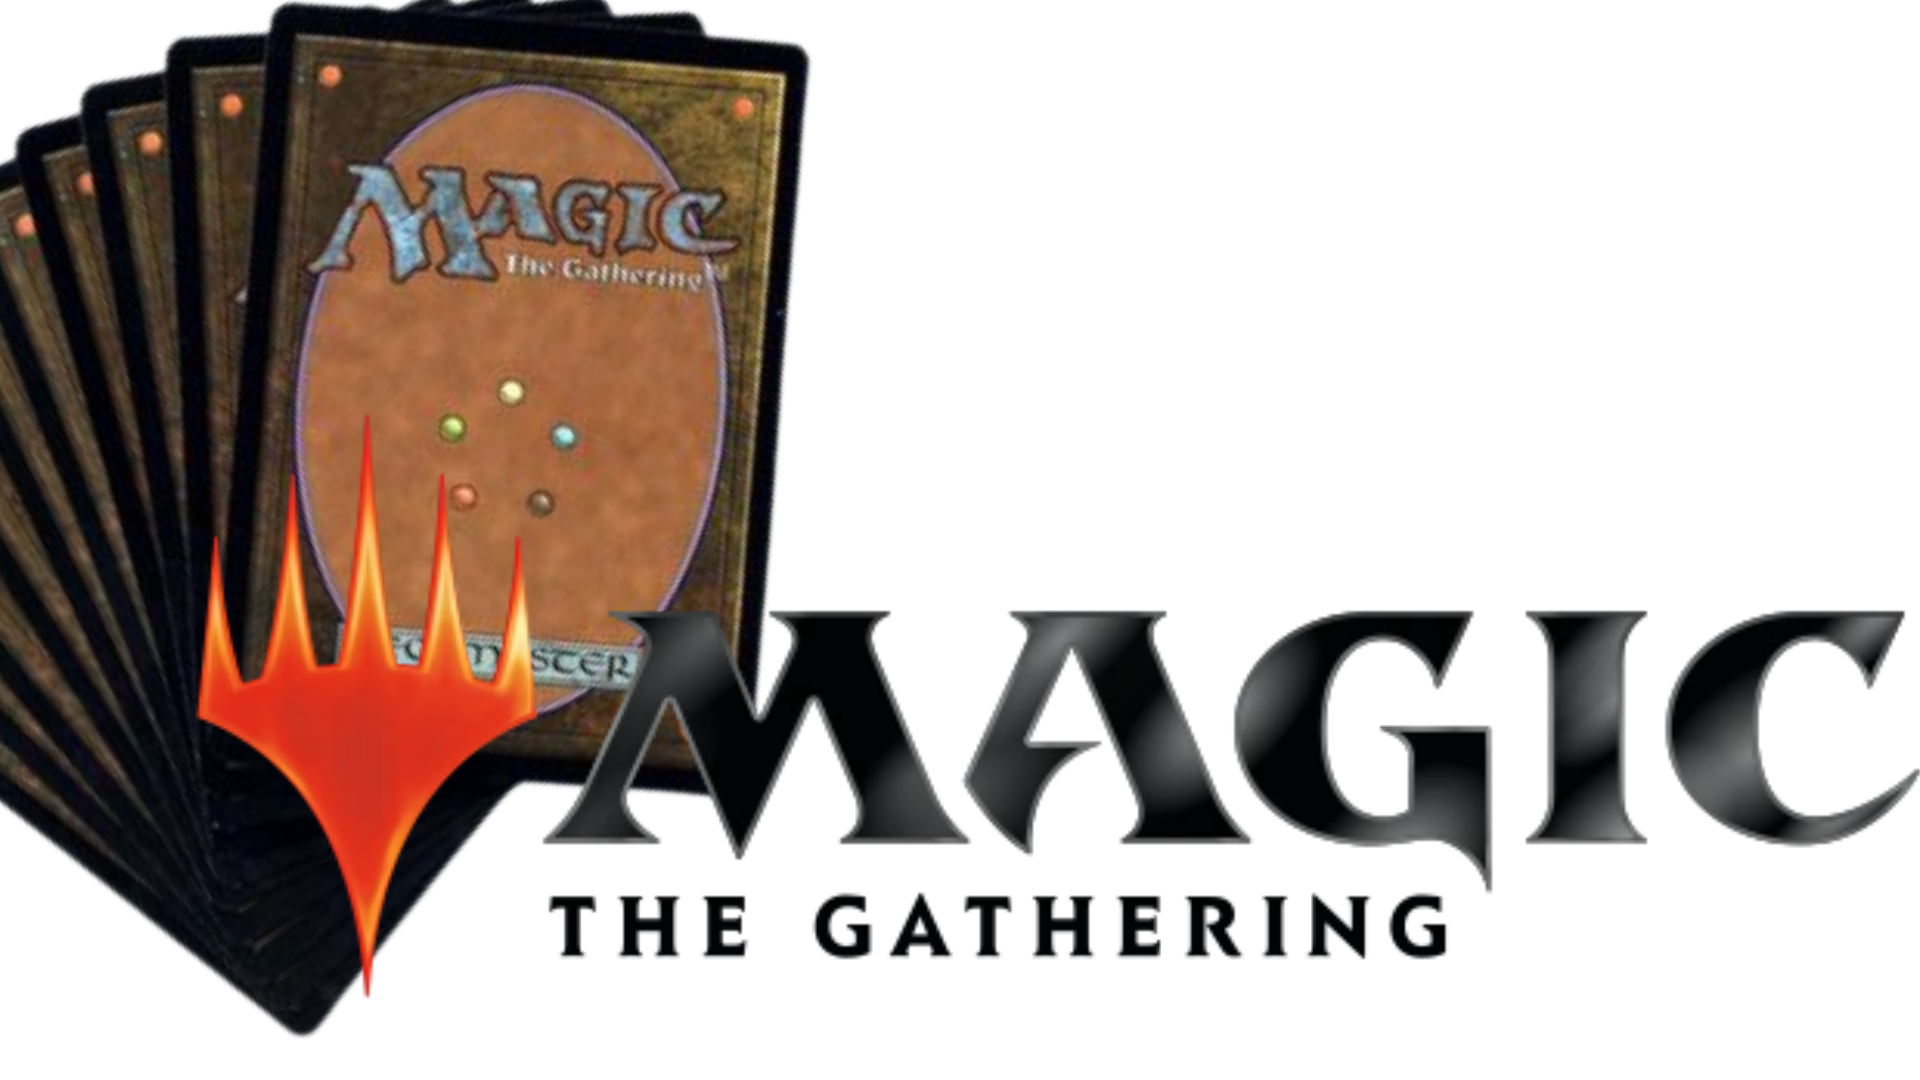 image of Magic cards with the words "Magic: the Gathering" icon